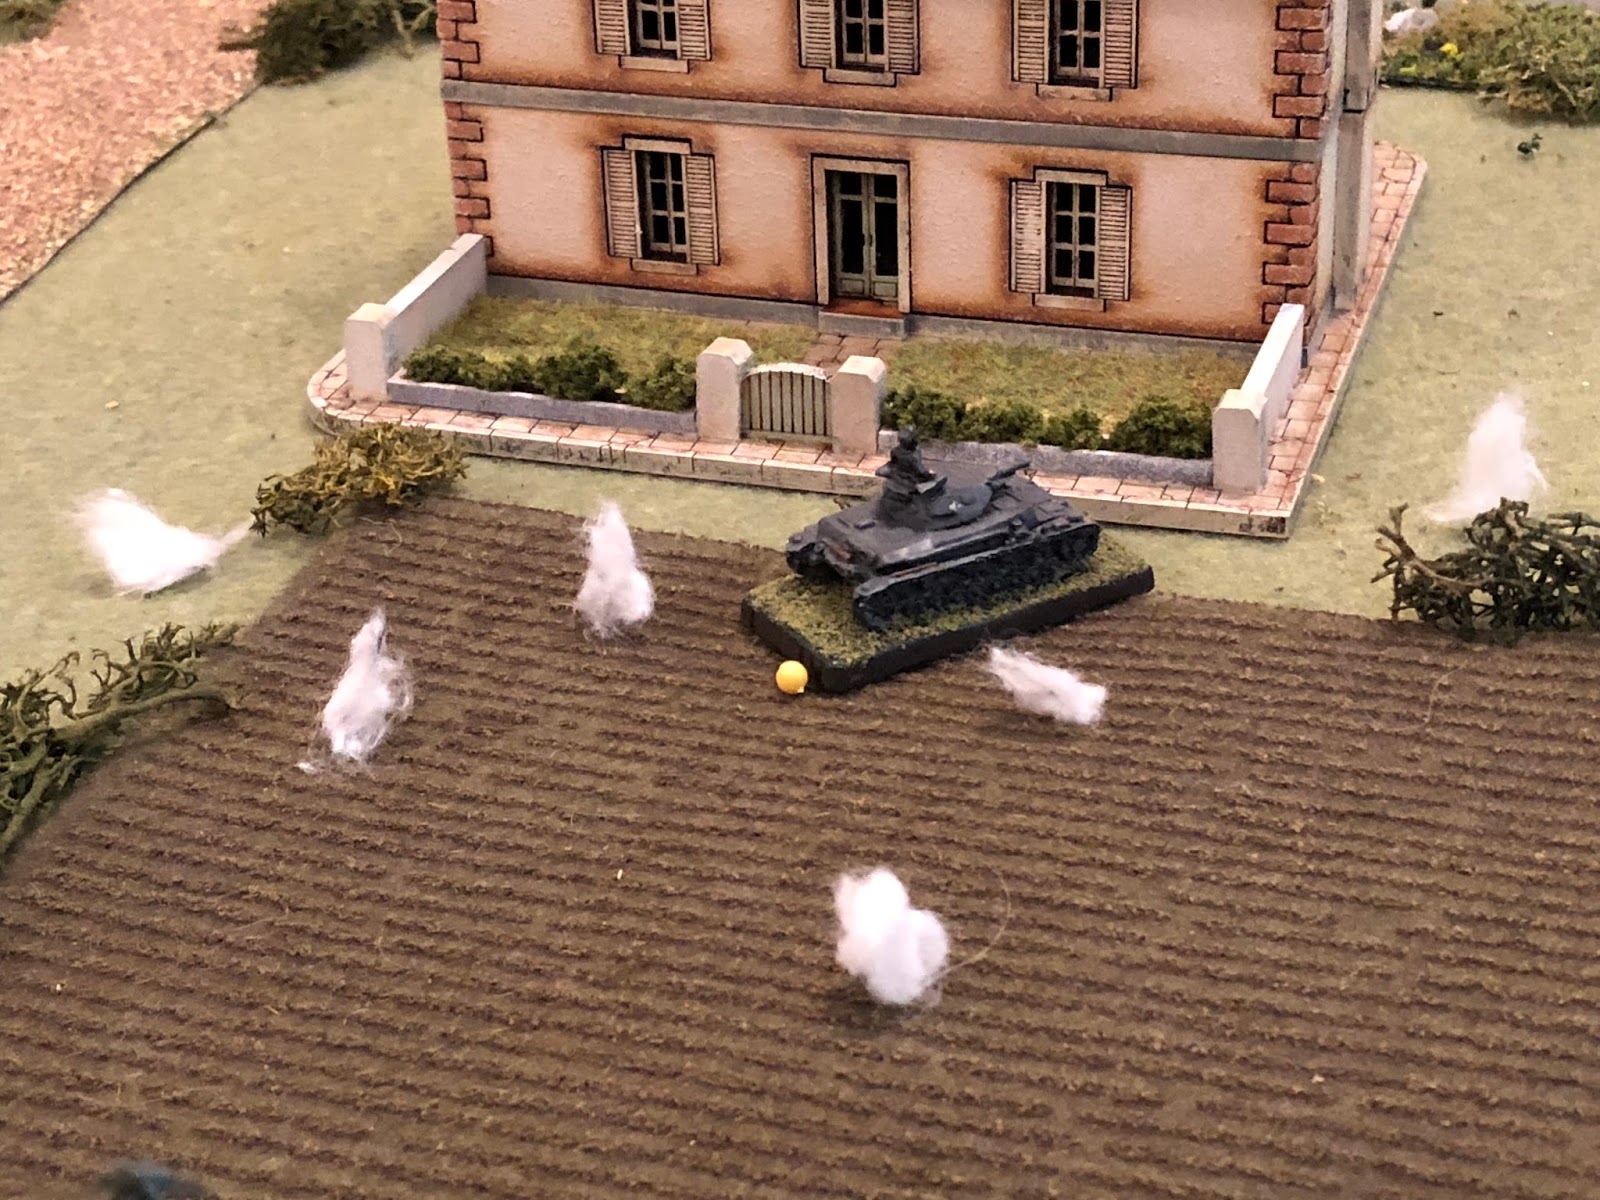  Sgt Graebner's Pz IV, pinning the crew behind Mlle Chevelle's house!  That is a significant development, the pin meaning Sgt Graebner can move his vehicle out to engage the French tanks on main street, but will more than likely not get the first sho